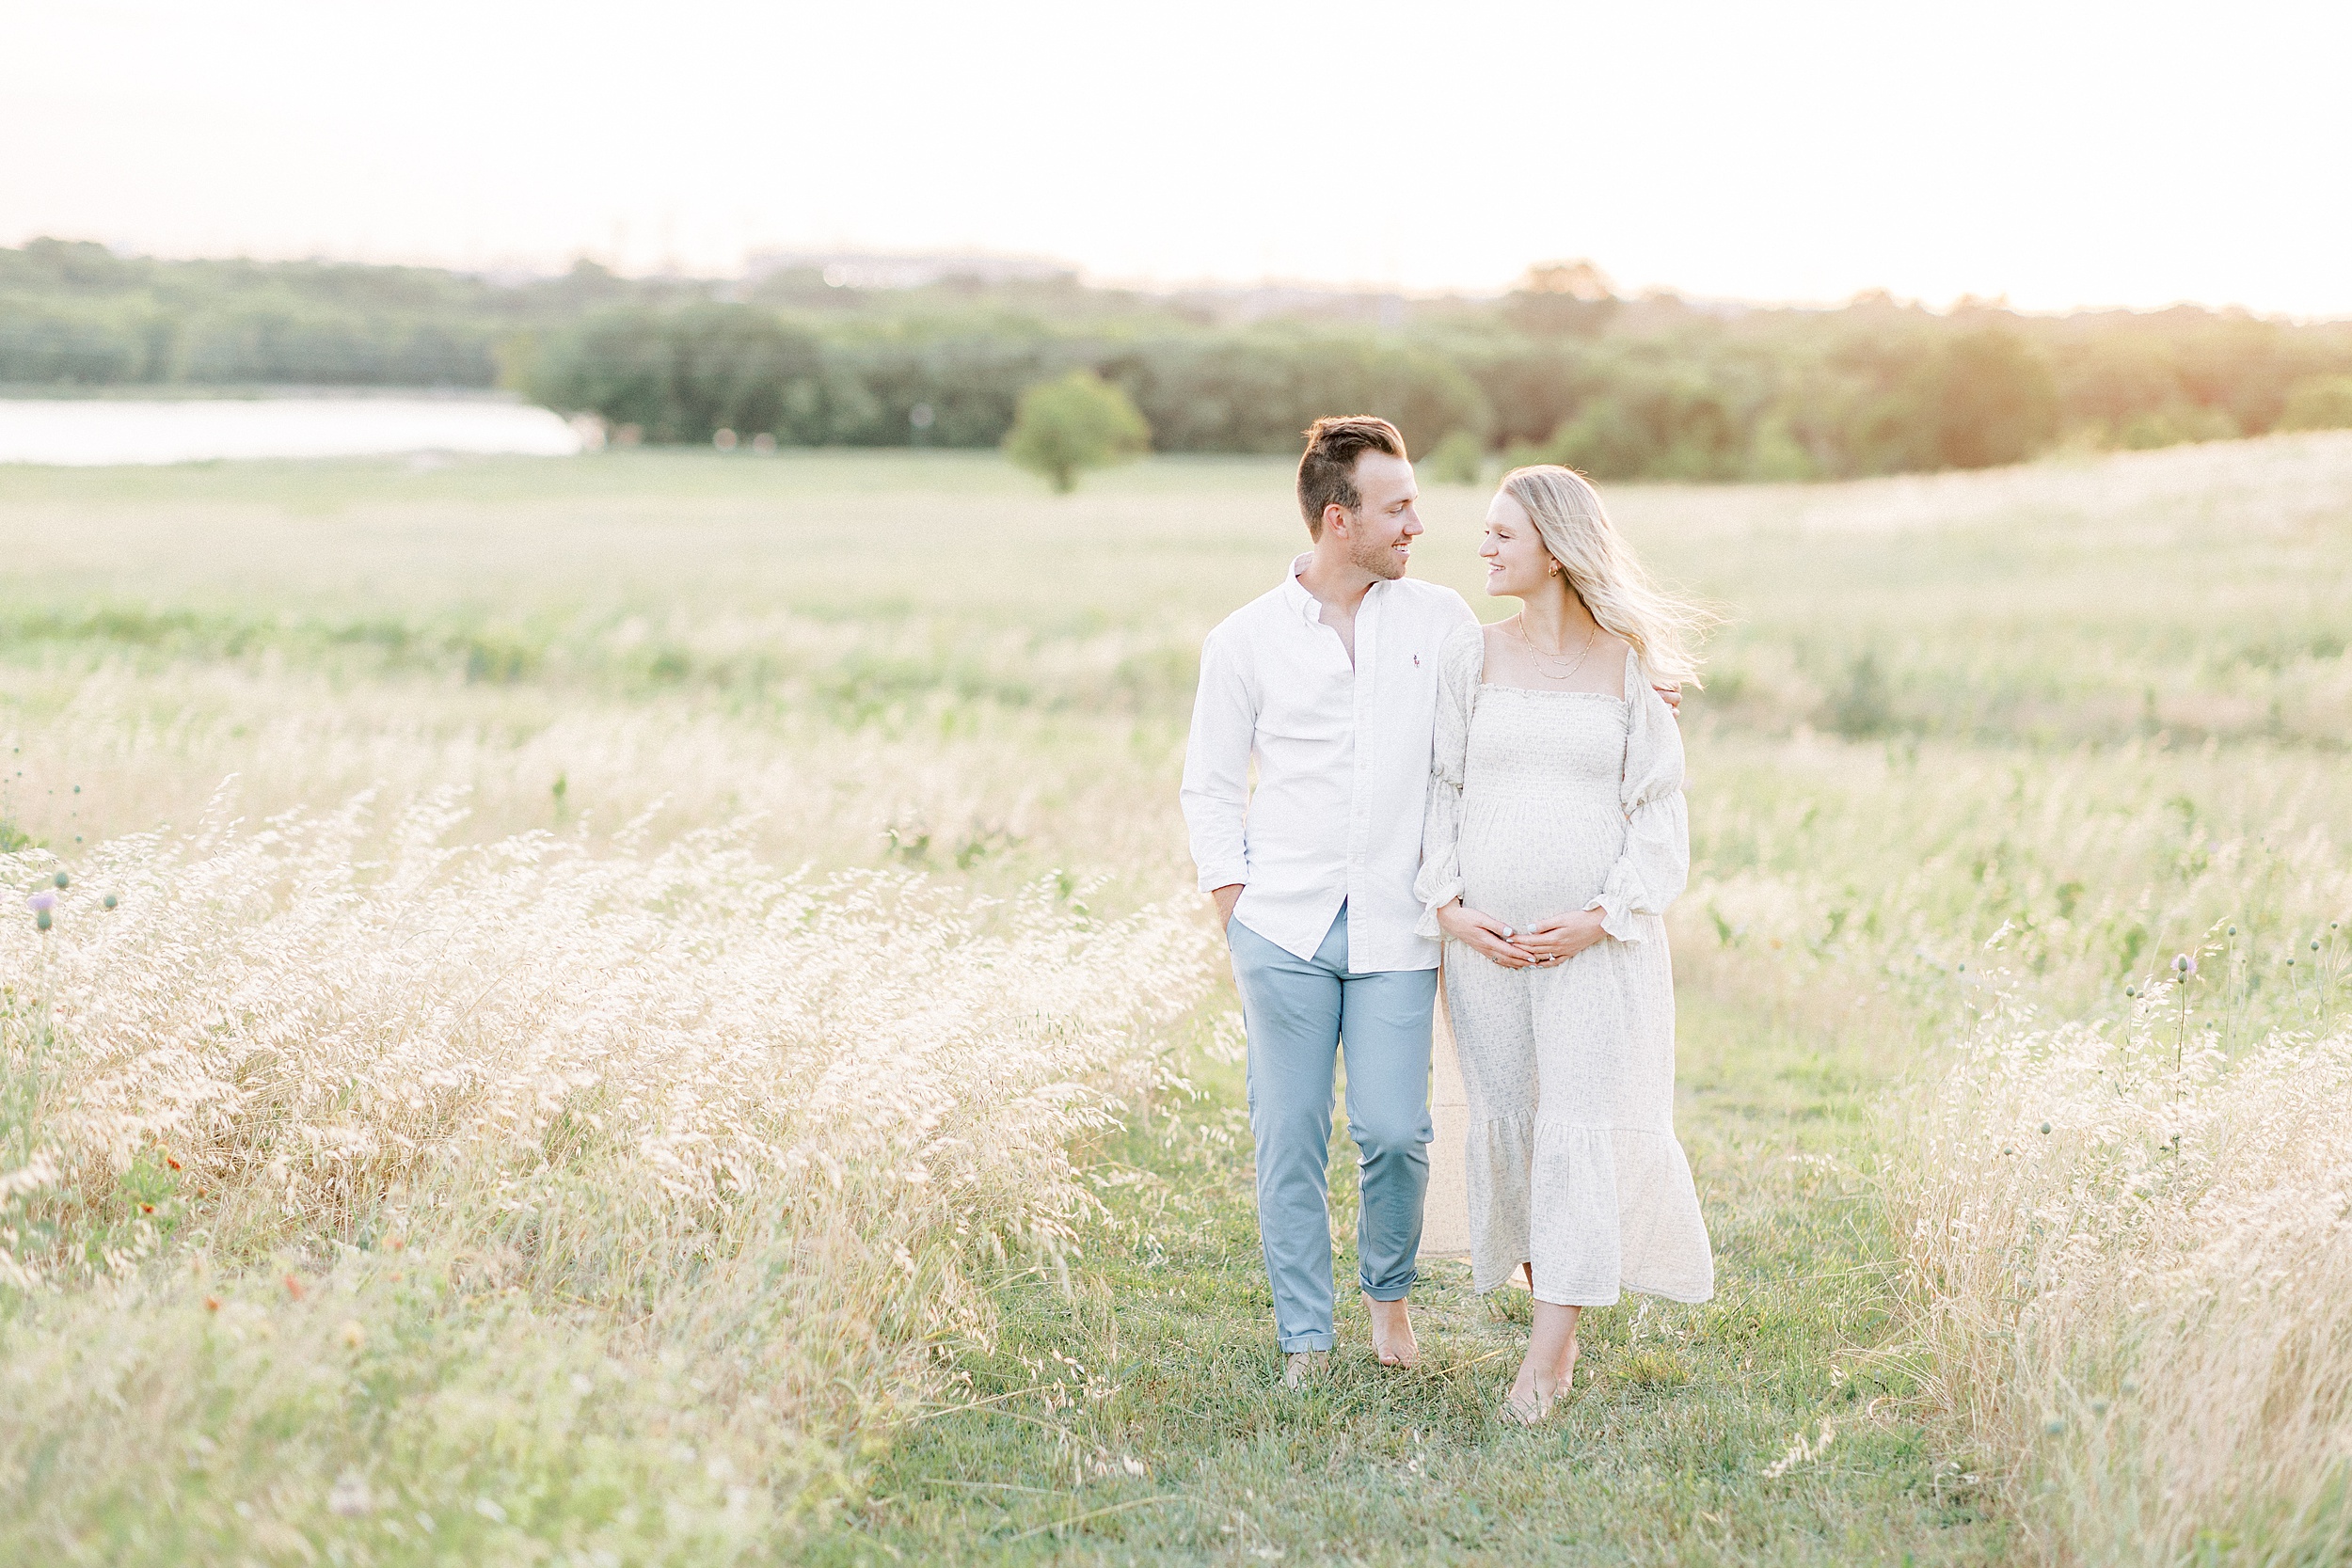 A mom to be holds her bump while walking through a field of tall grass with her partner in blue pants and a white shirt